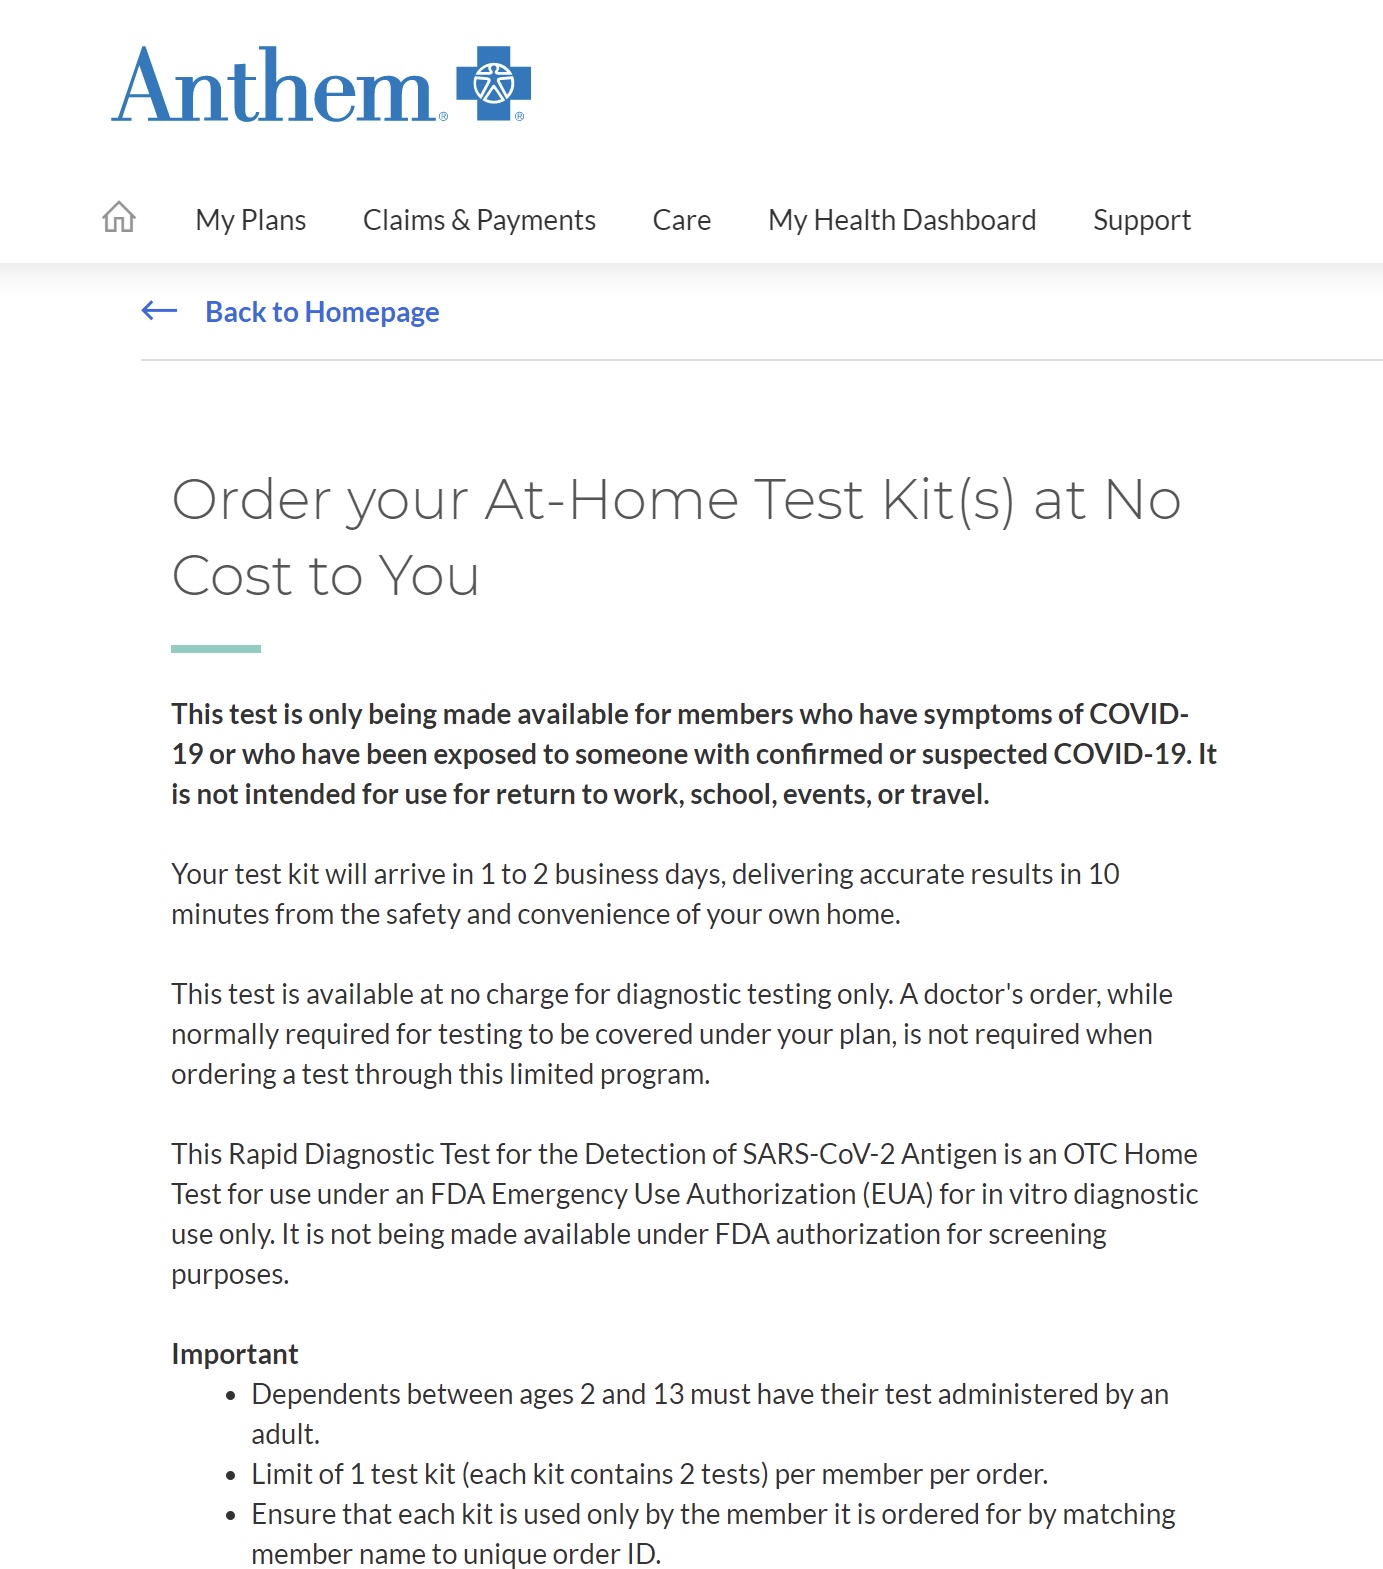 Free at home COVID test kit for each member with Anthem health insurance